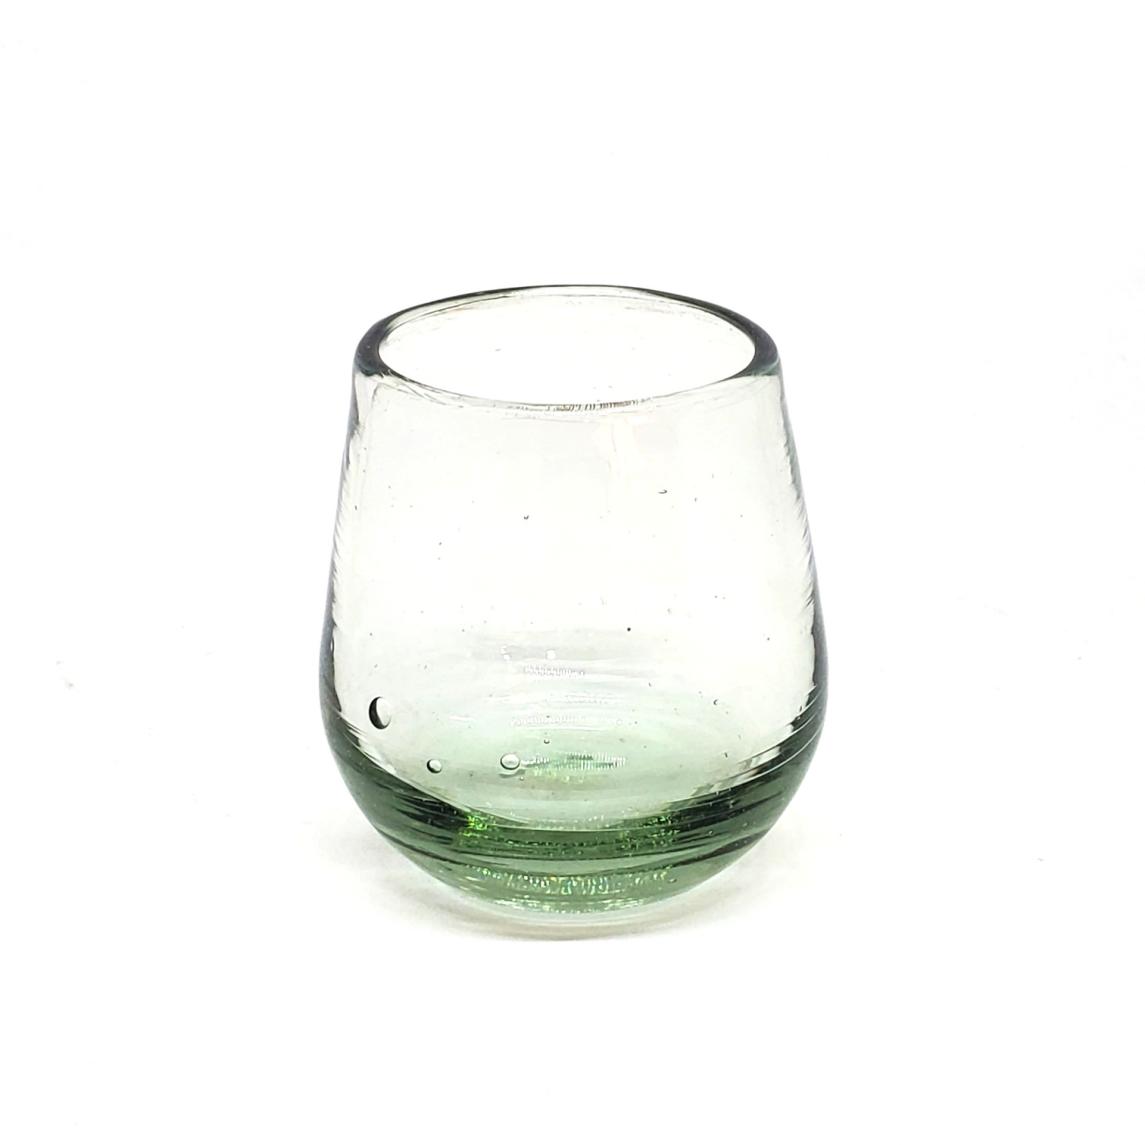 Wholesale Clear Glassware / Clear 6 oz Roly Poly Glasses  / Our Clear Blown Glasses are individually handcrafted from recycled glass, making each of them unique works of art.